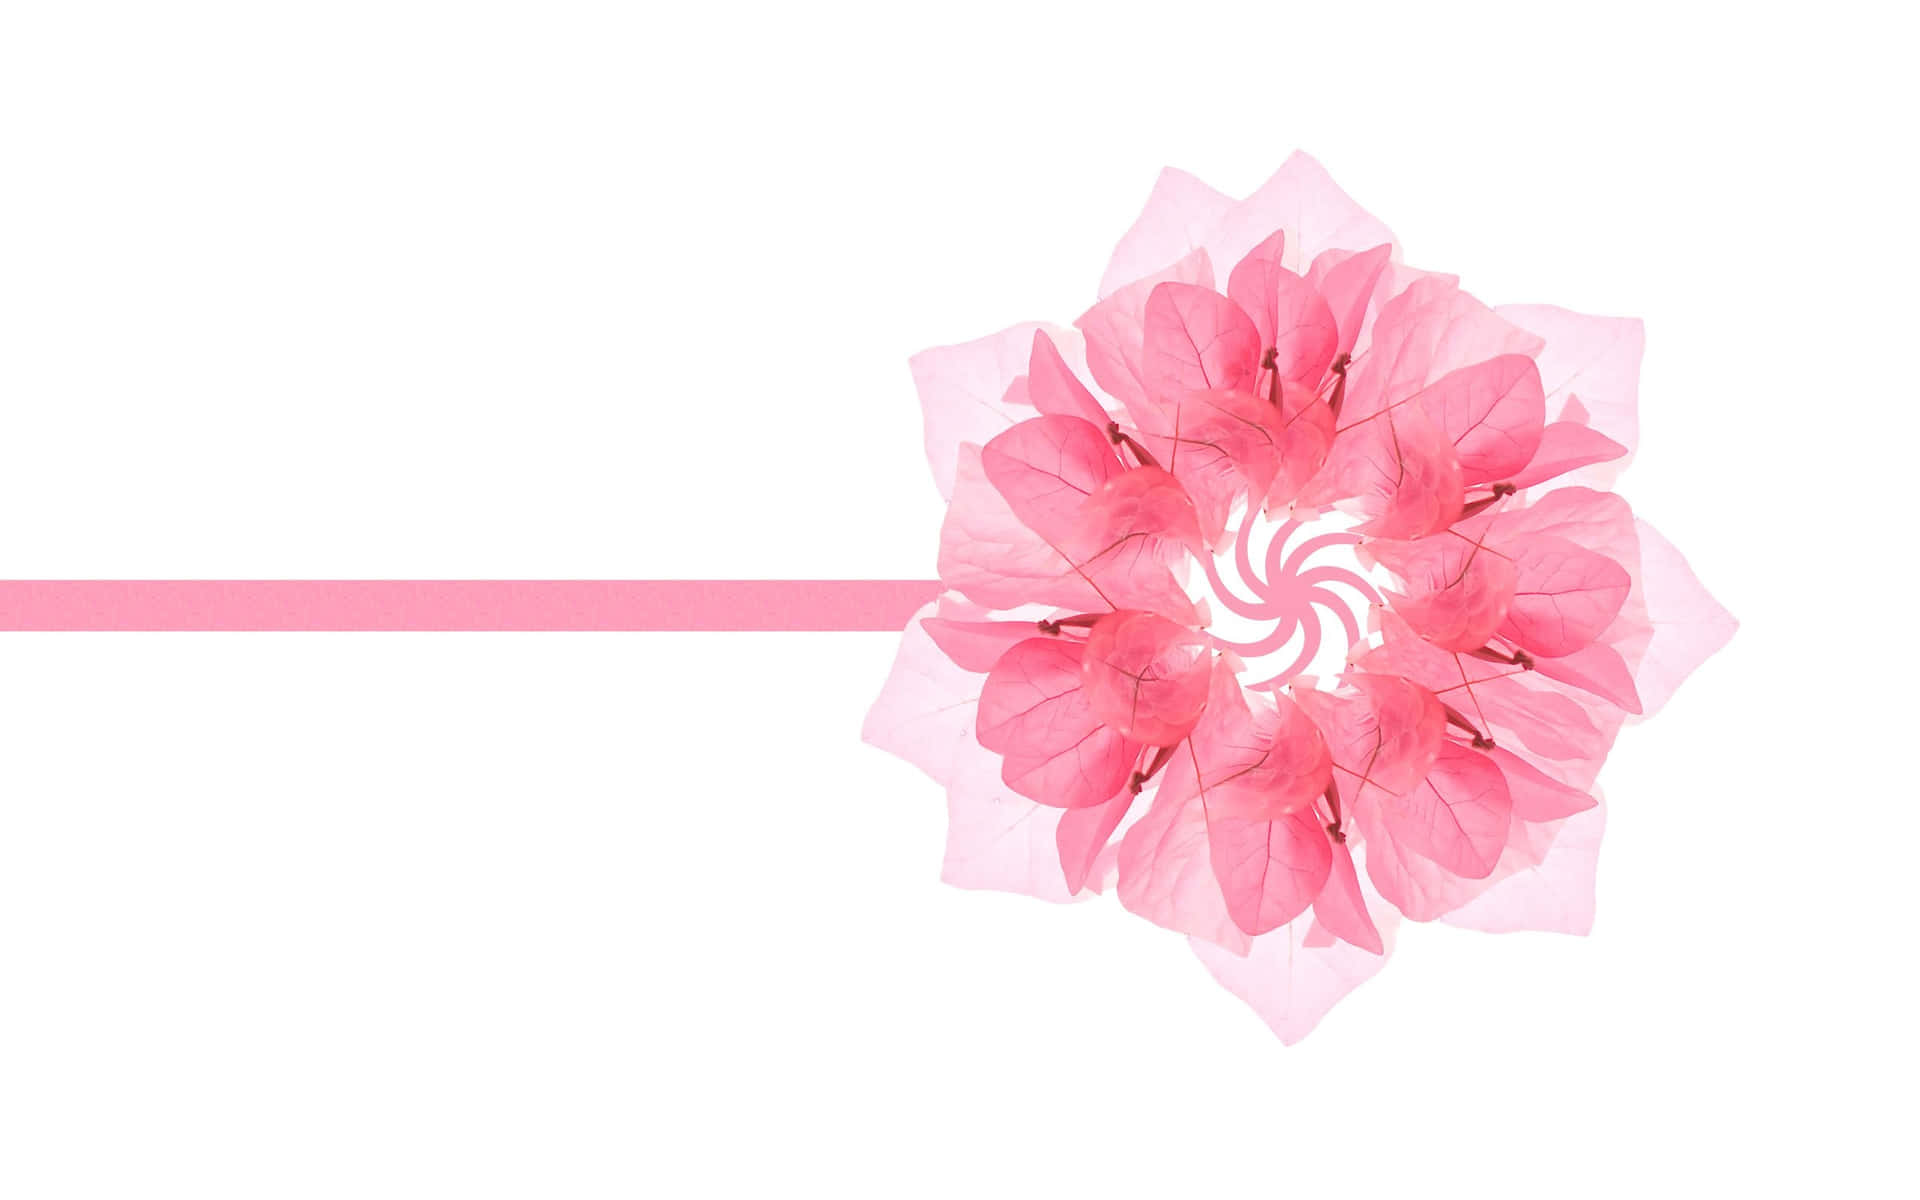 https://wallpapers.com/images/featured/minimalist-flower-wshe3dse3pwvuoy7.jpg